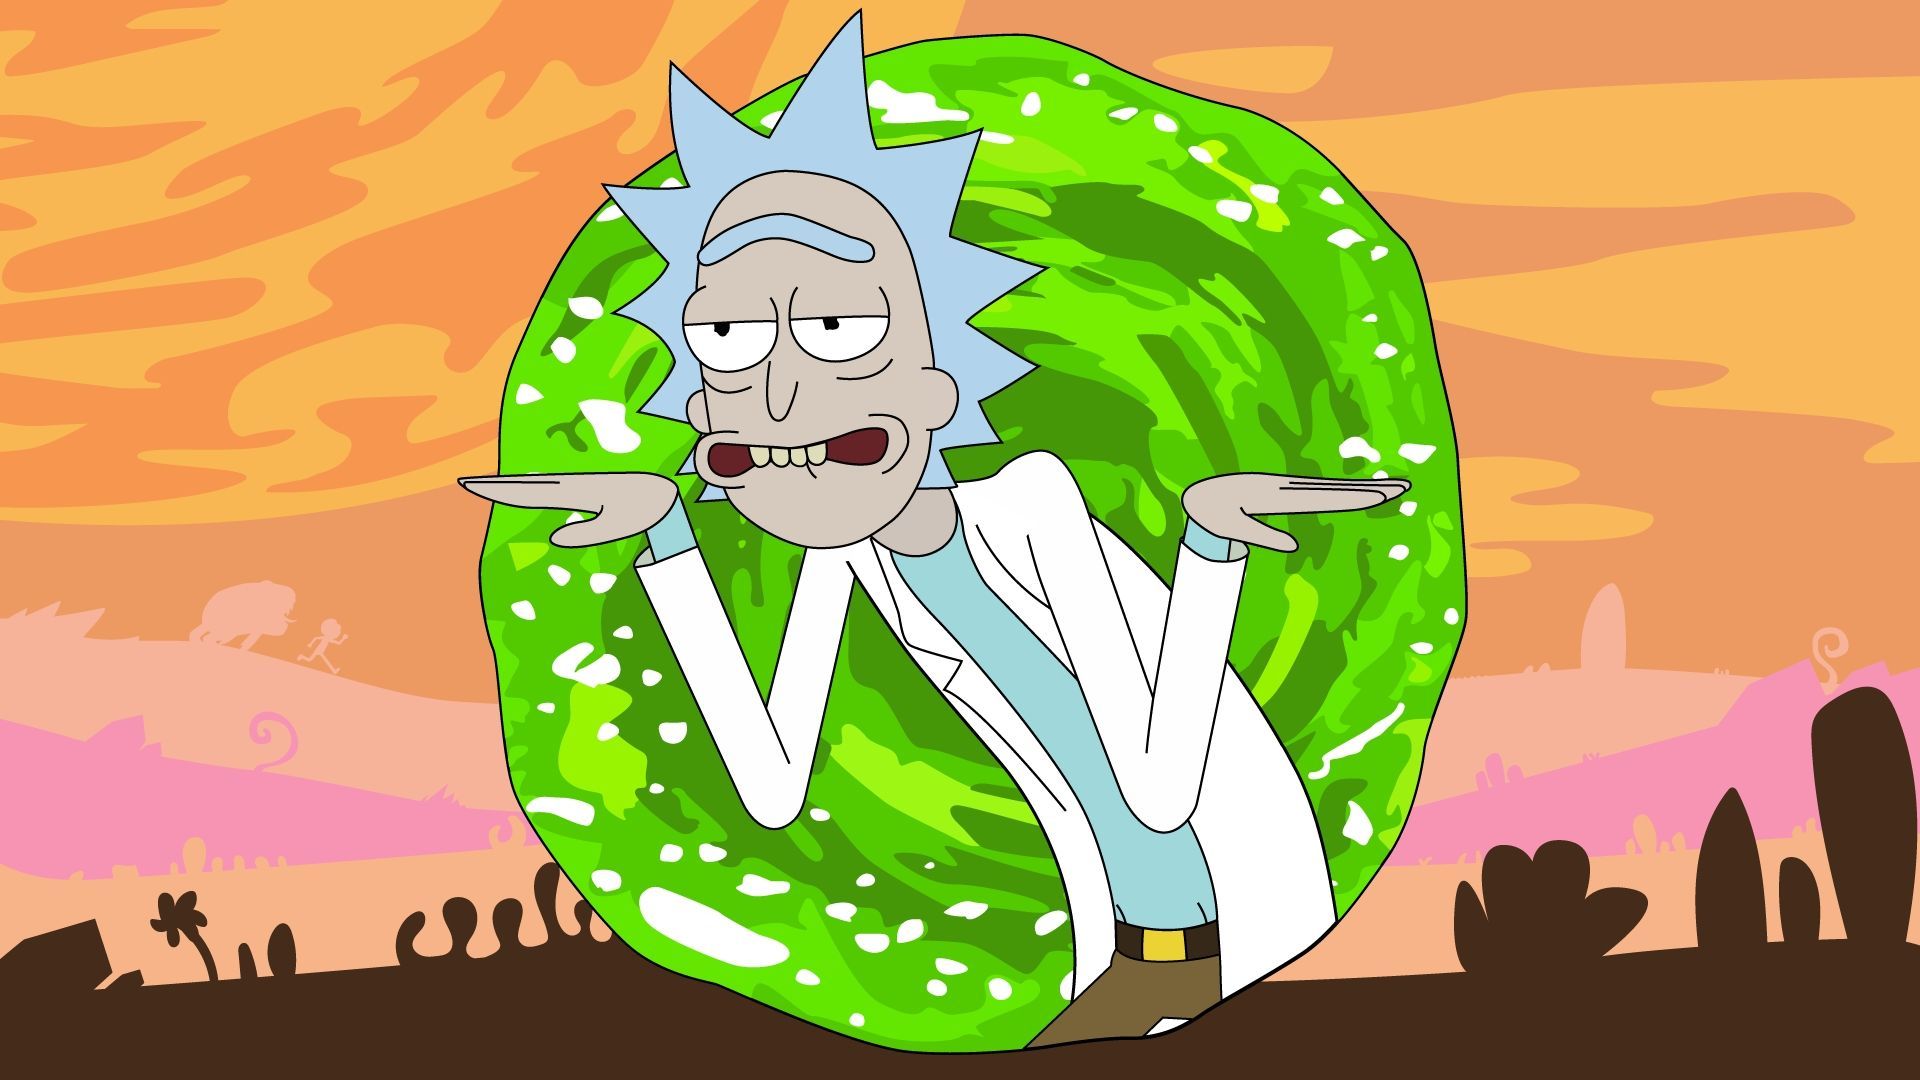 Rick And Morty 1920X1080 Wallpapers